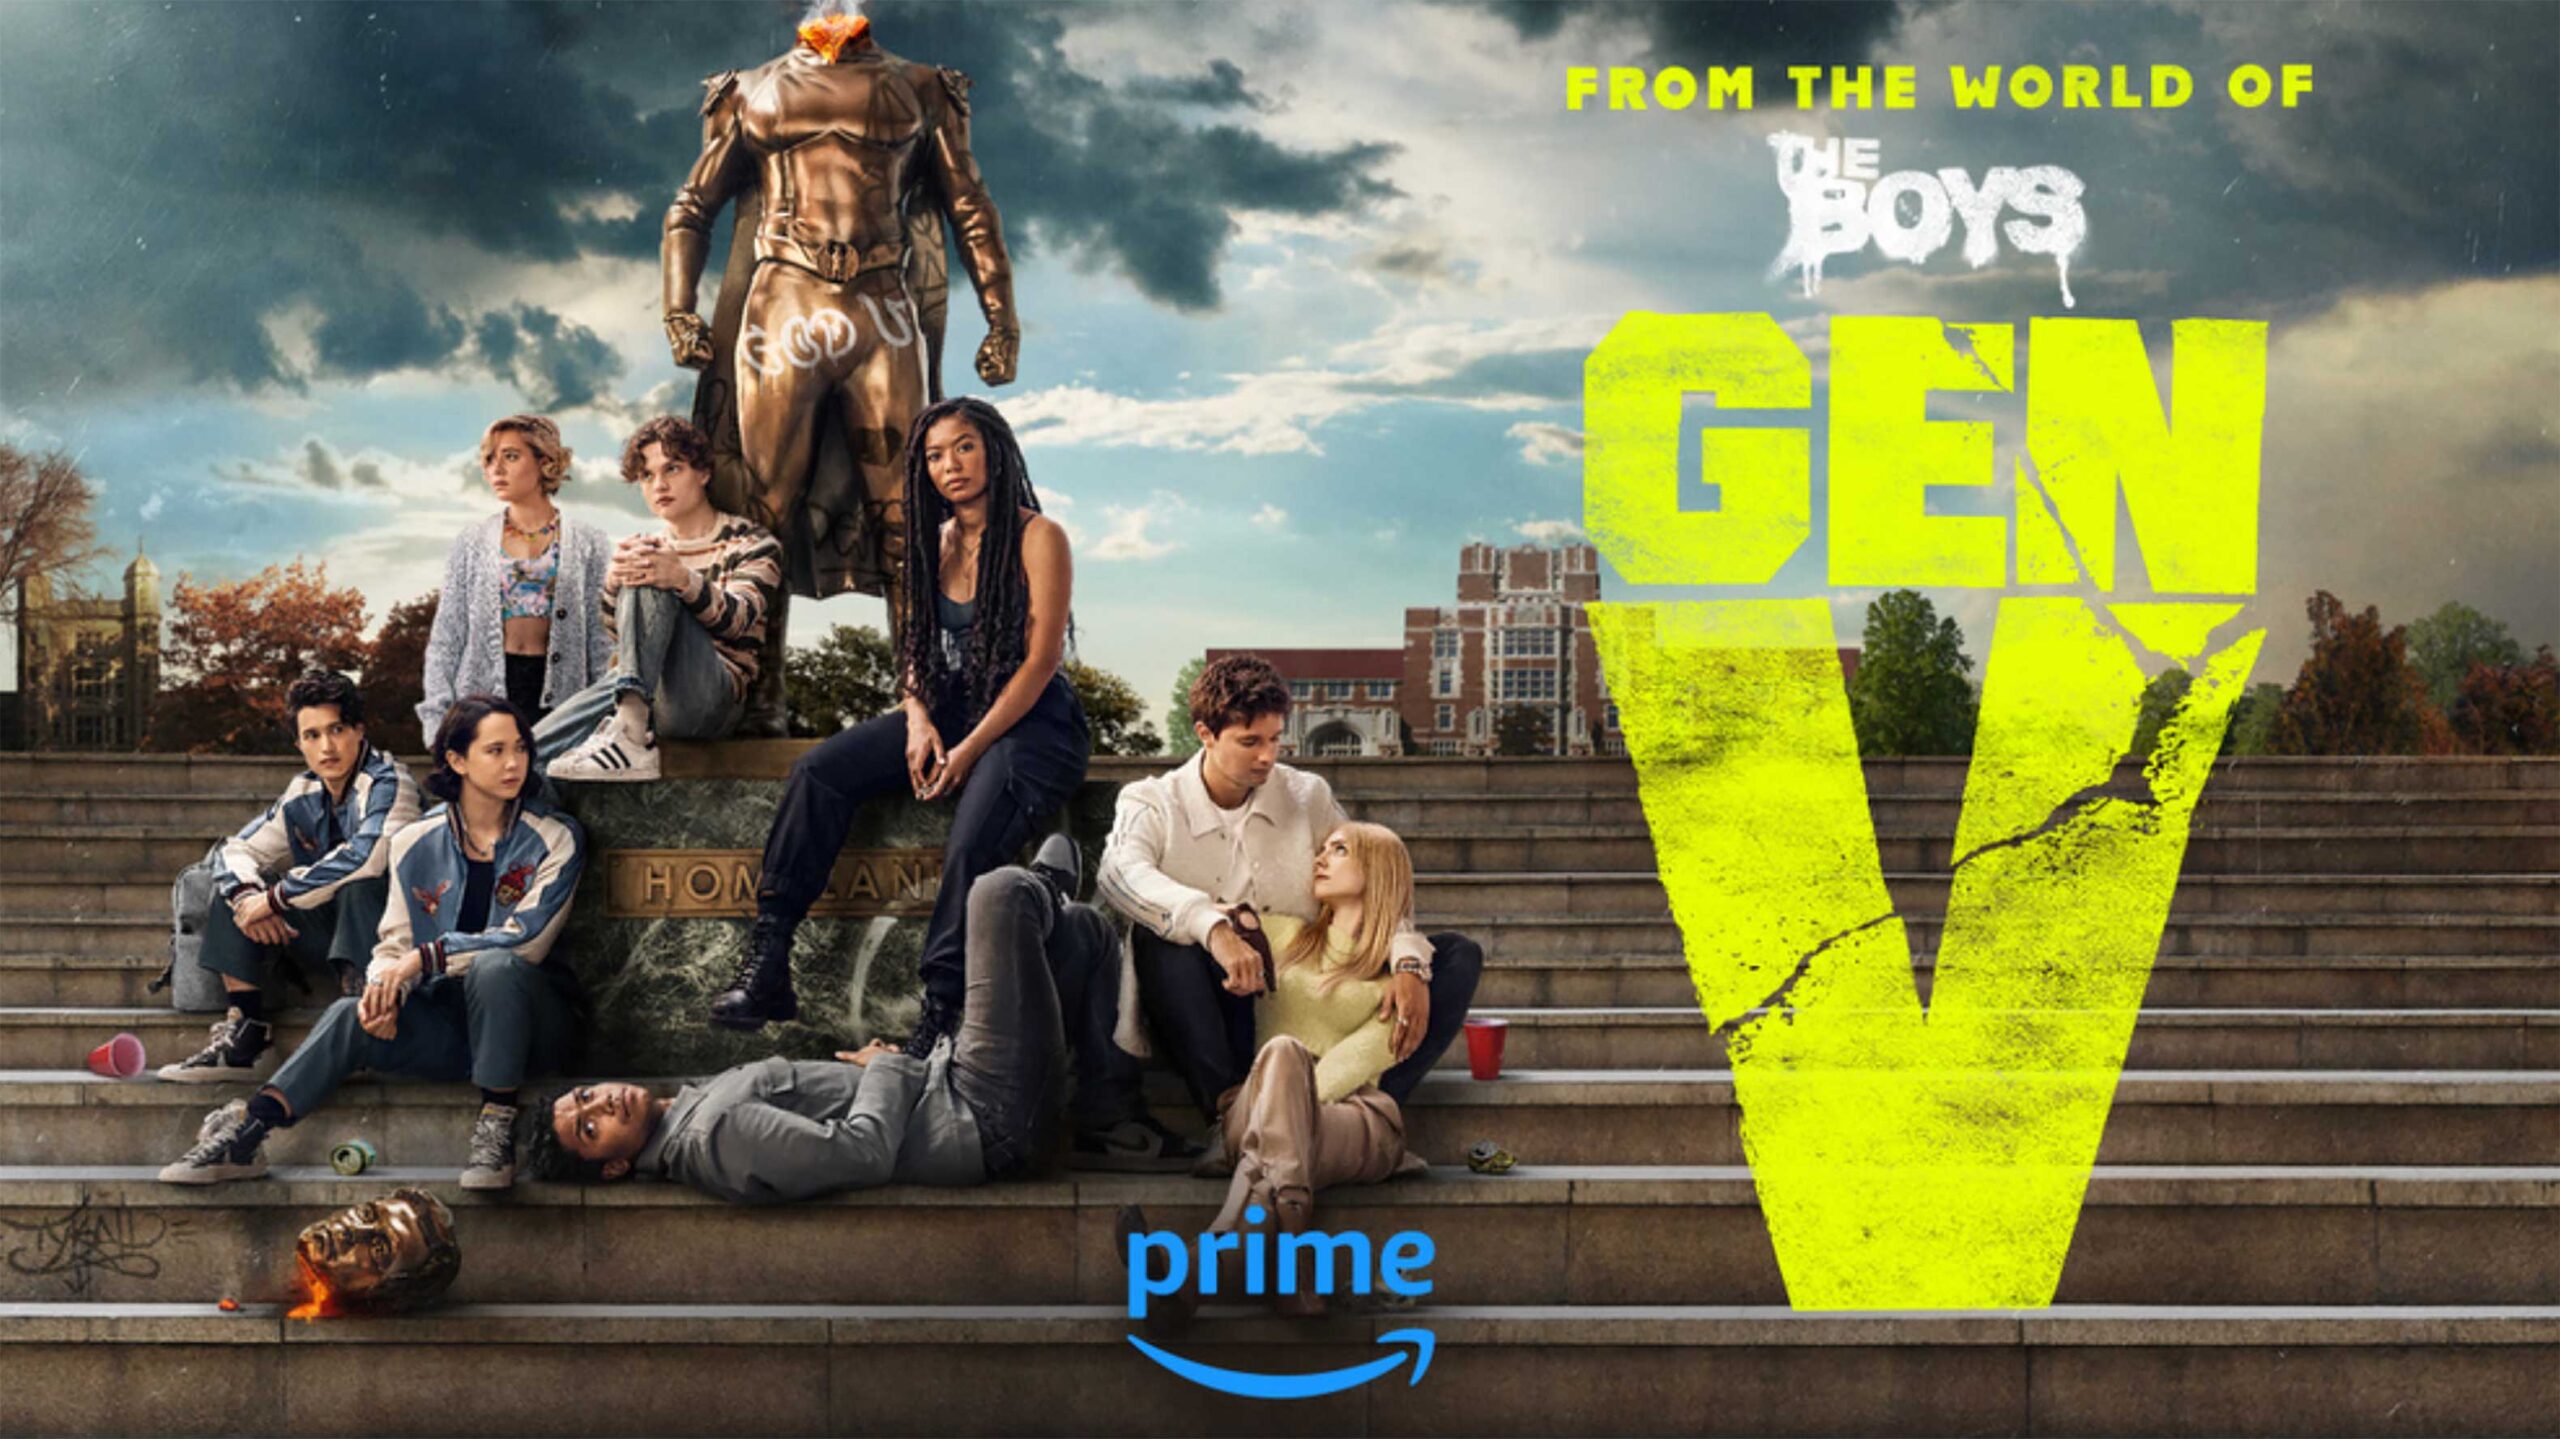 Gen V' Episode Guide: Prime Video Premiere Dates, How Many Episodes, Cast  Guide, And More